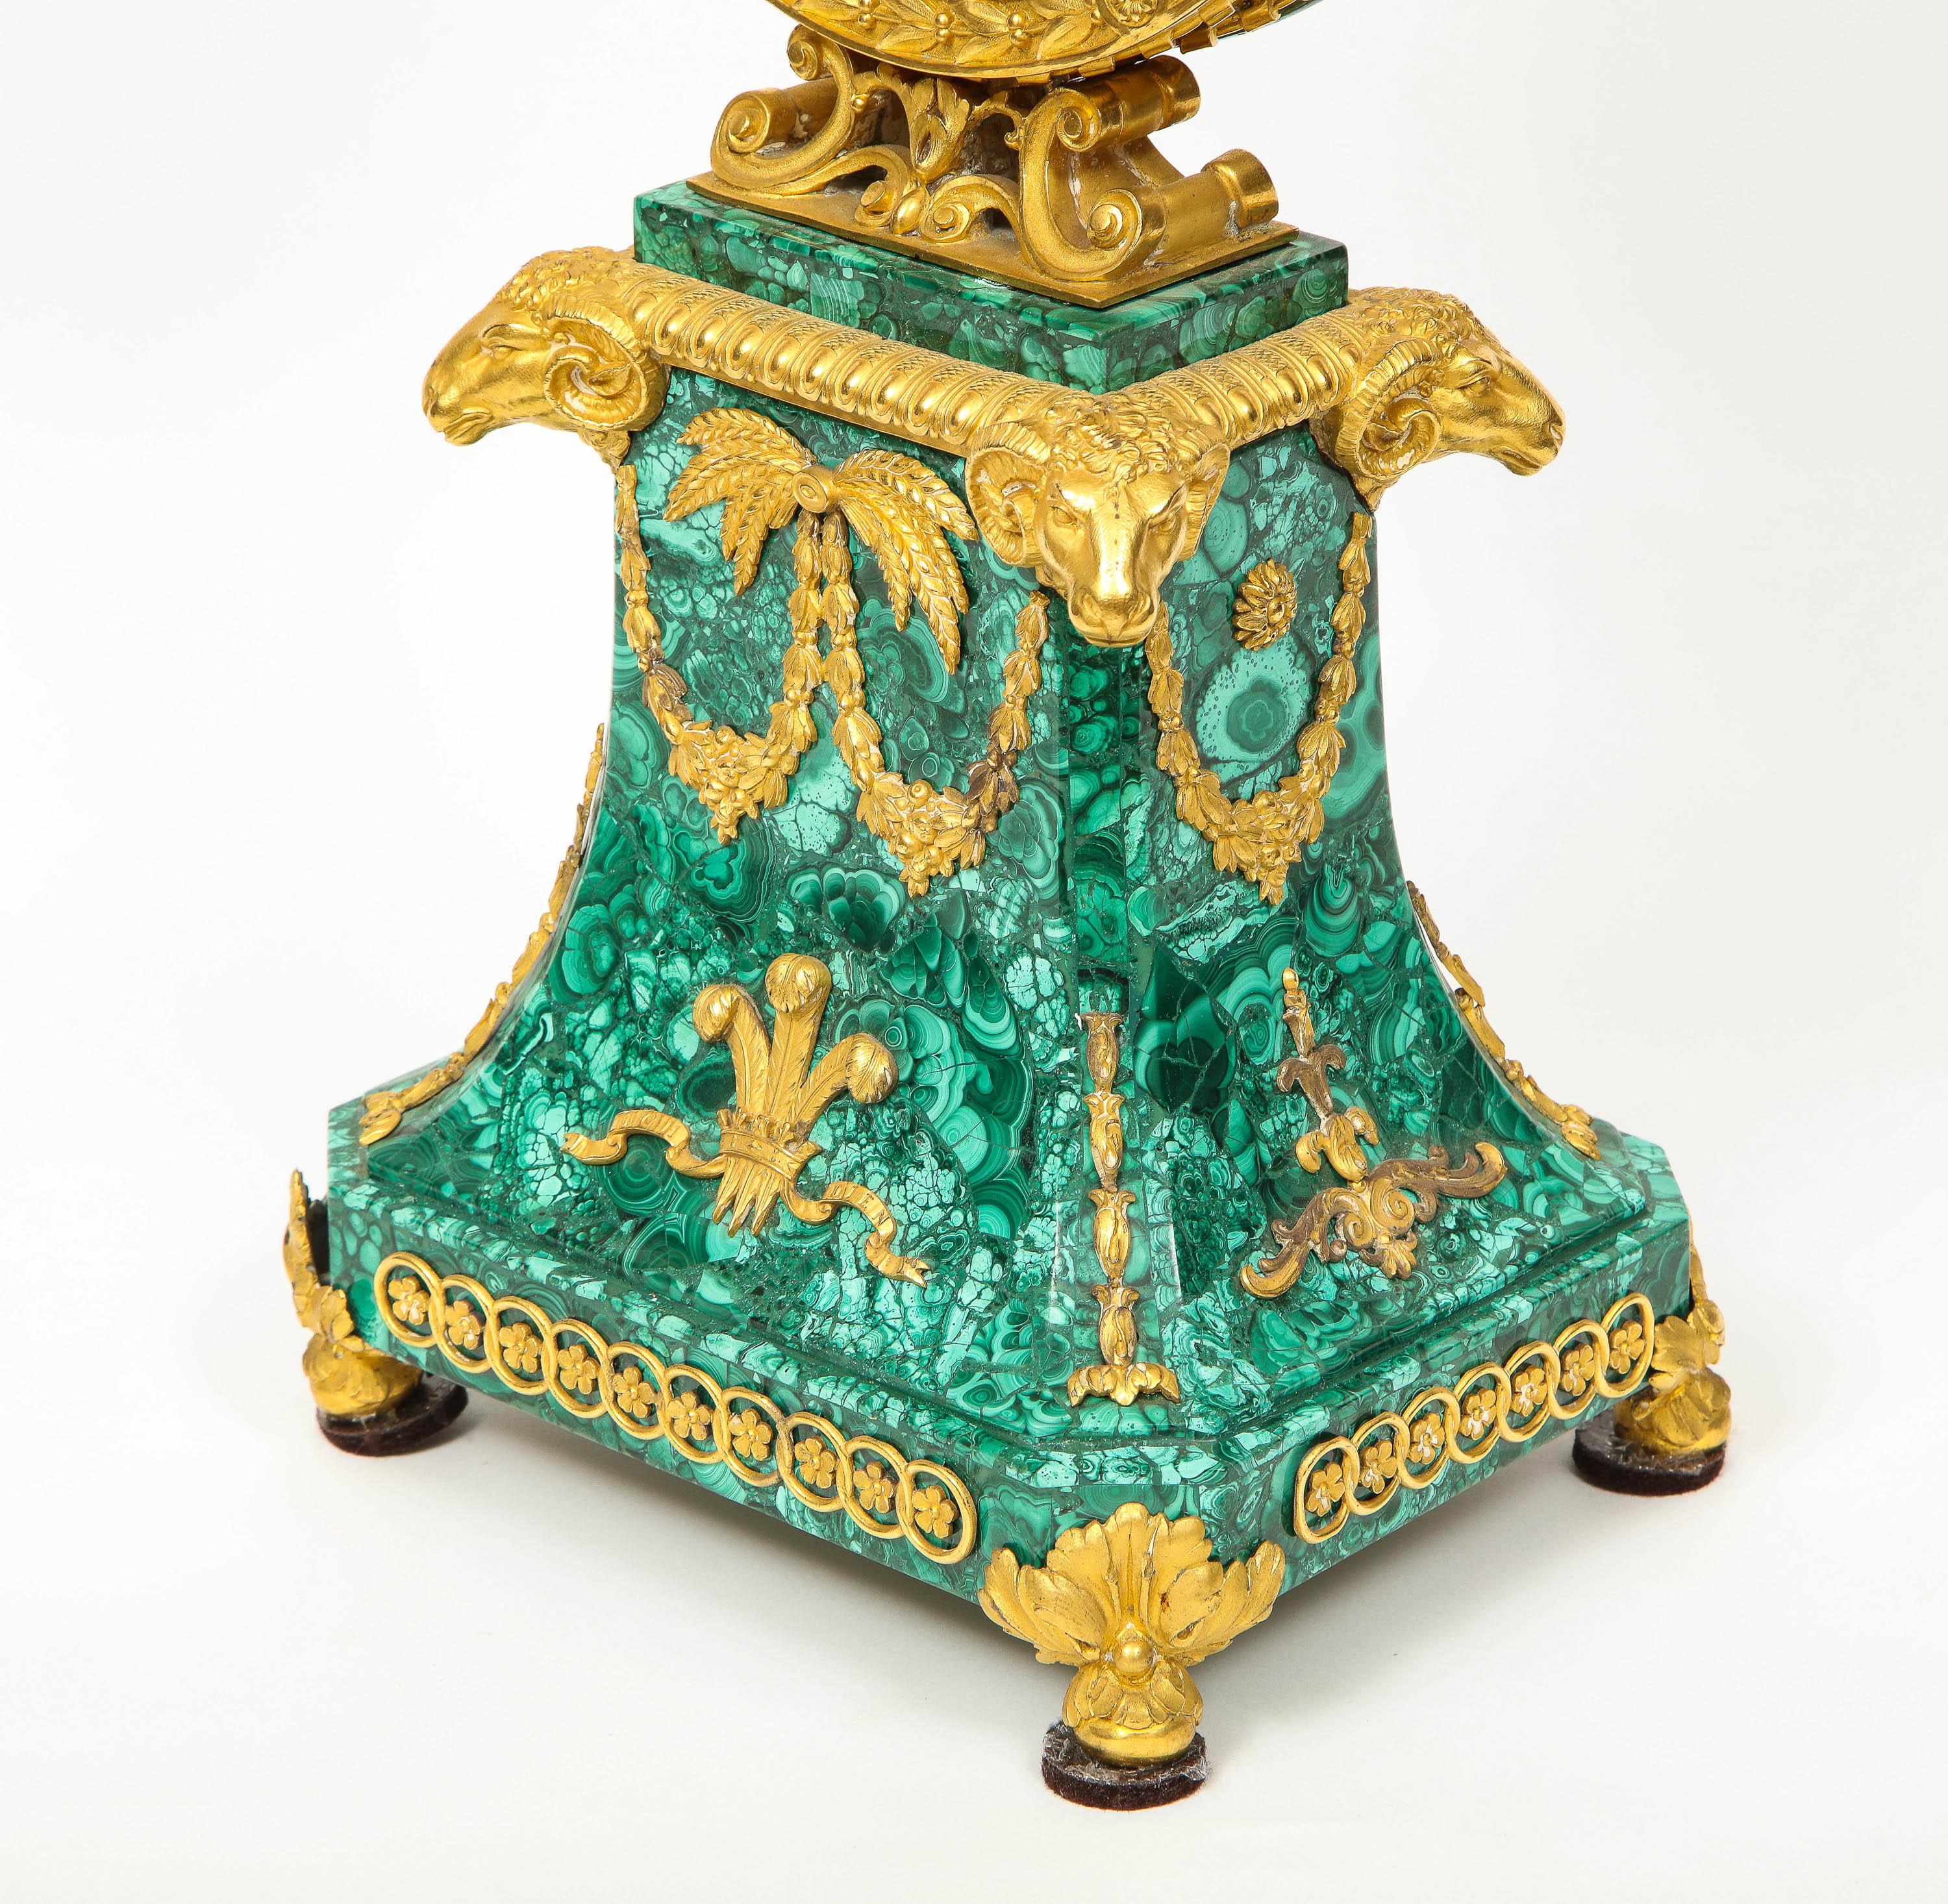 Edward F. Caldwell, An Extremely Fine and Rare Ormolu-Mounted Malachite Clock For Sale 1